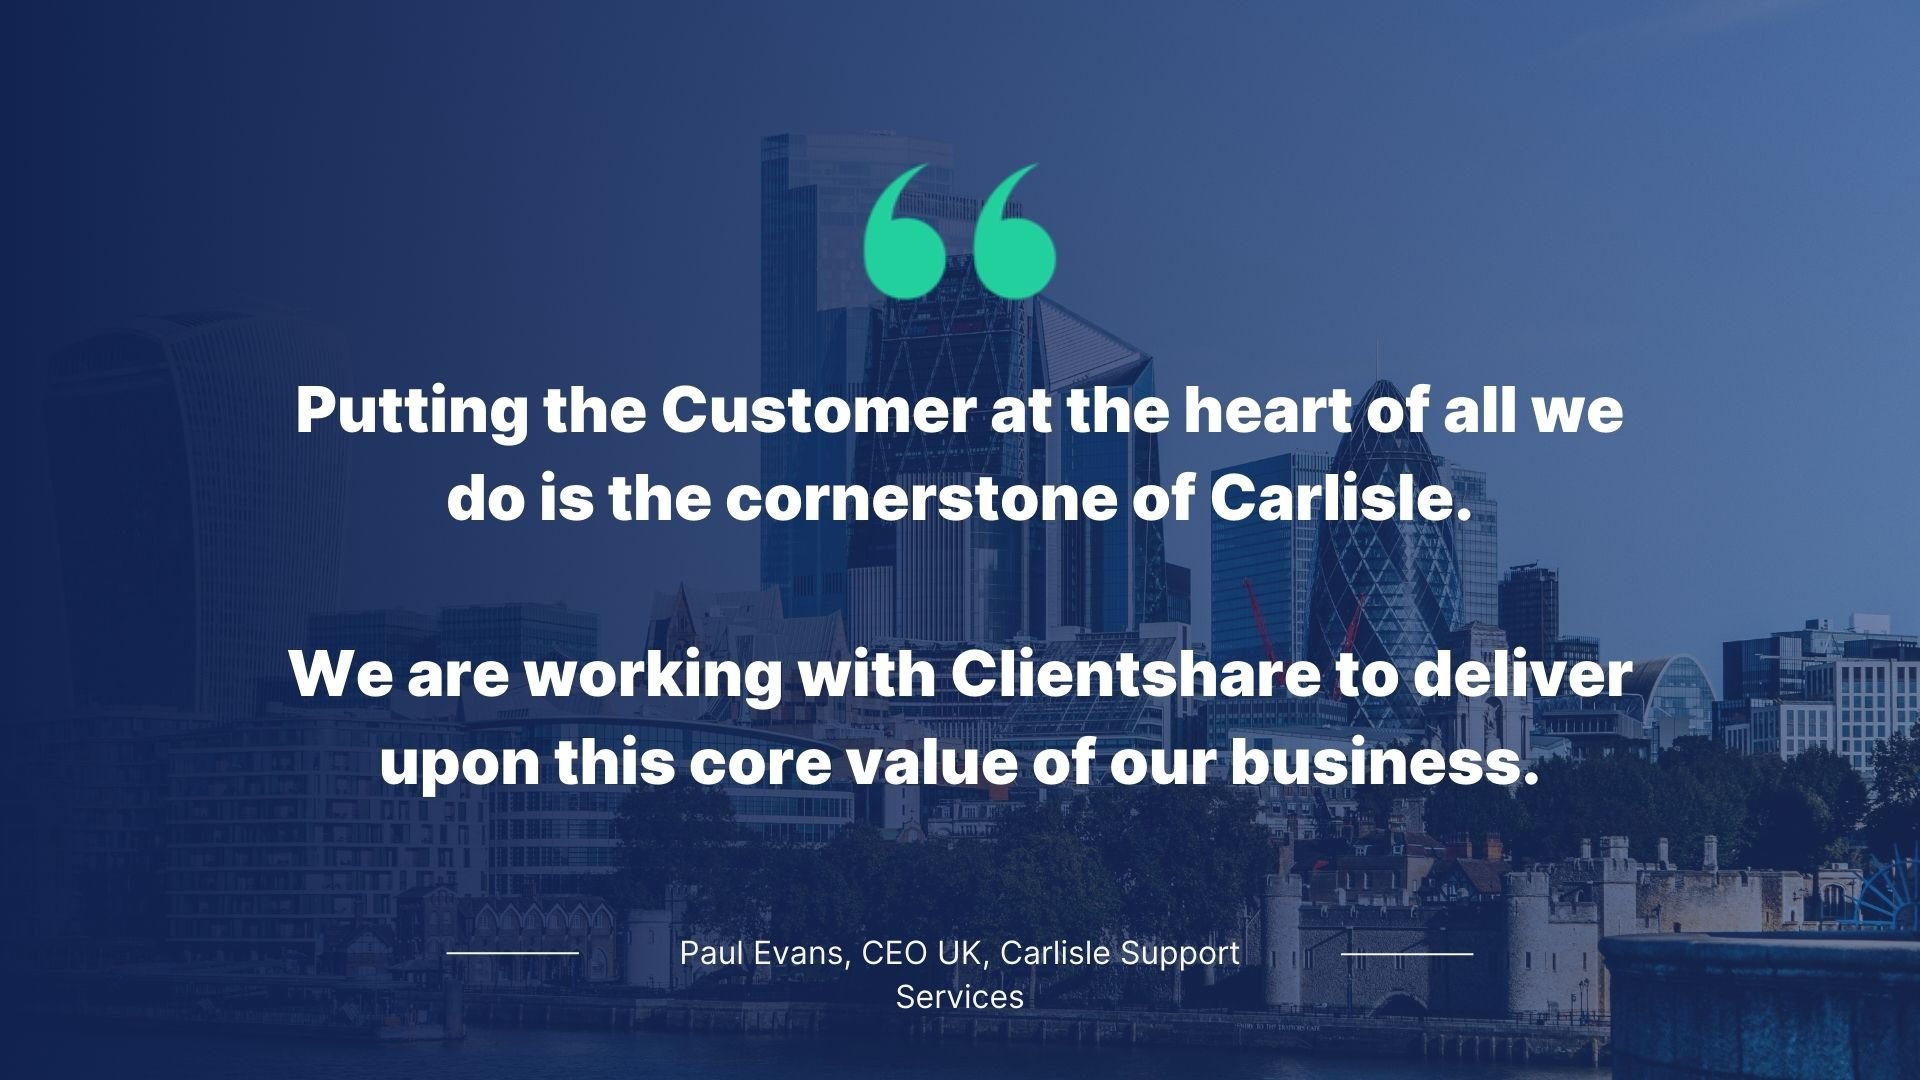 Quote by Paul Evans, CEO, Carlisle Support Services: Putting the customer at the heart of all we do is the cornerstone of Carlisle. We are working with Clientshare to deliver upon this core value of our business.